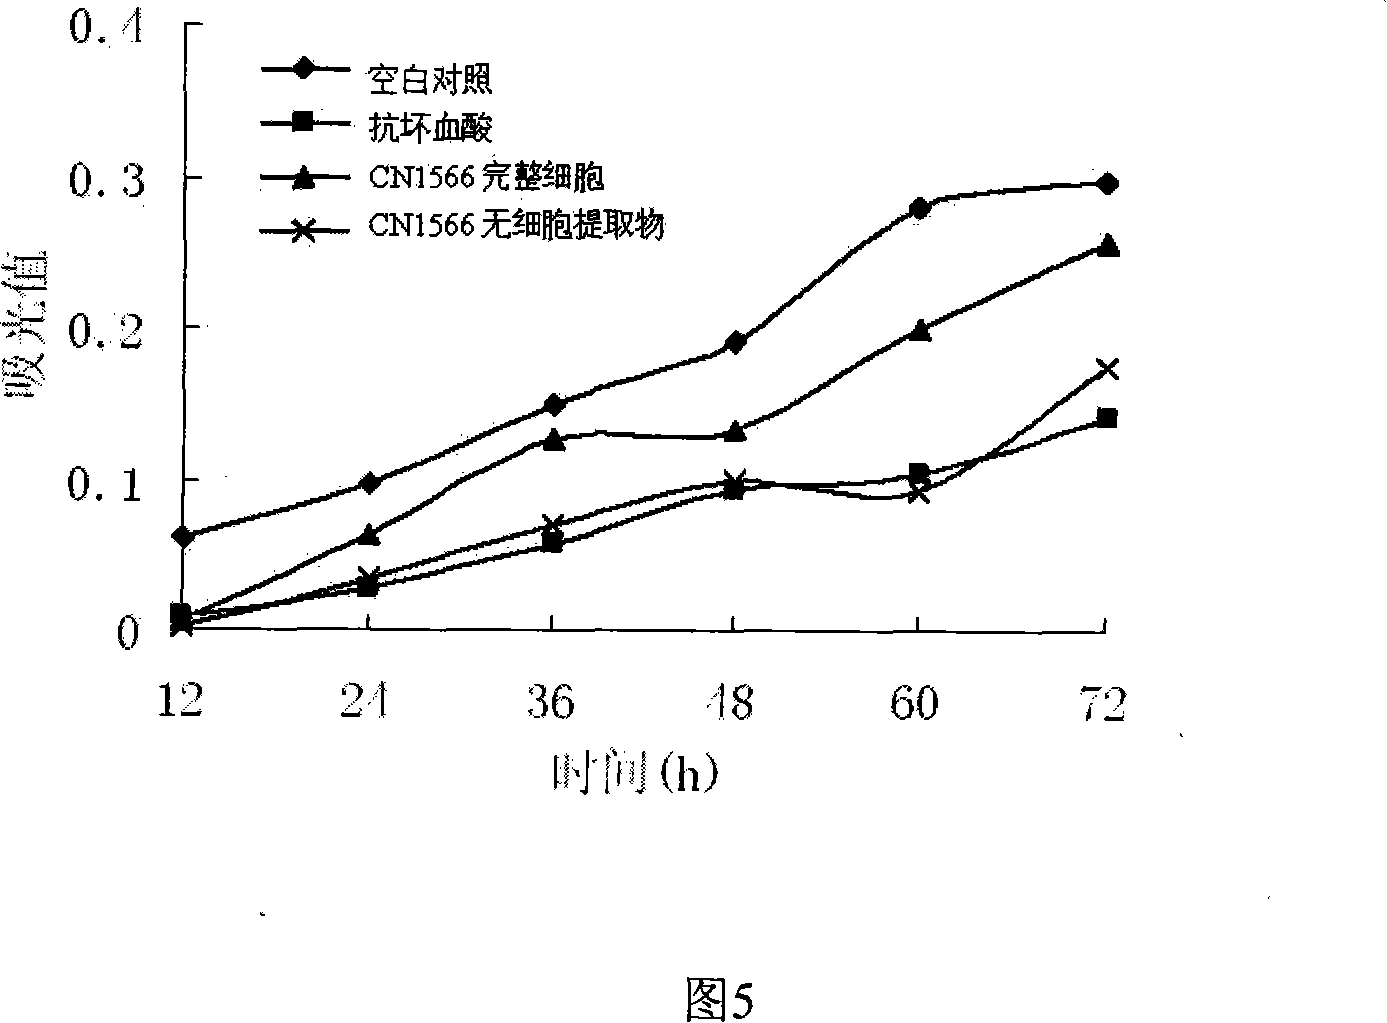 Oxidation resistant Lactobacillus casei capable of resisting hydrogen peroxide and eliminating free radical, and use thereof